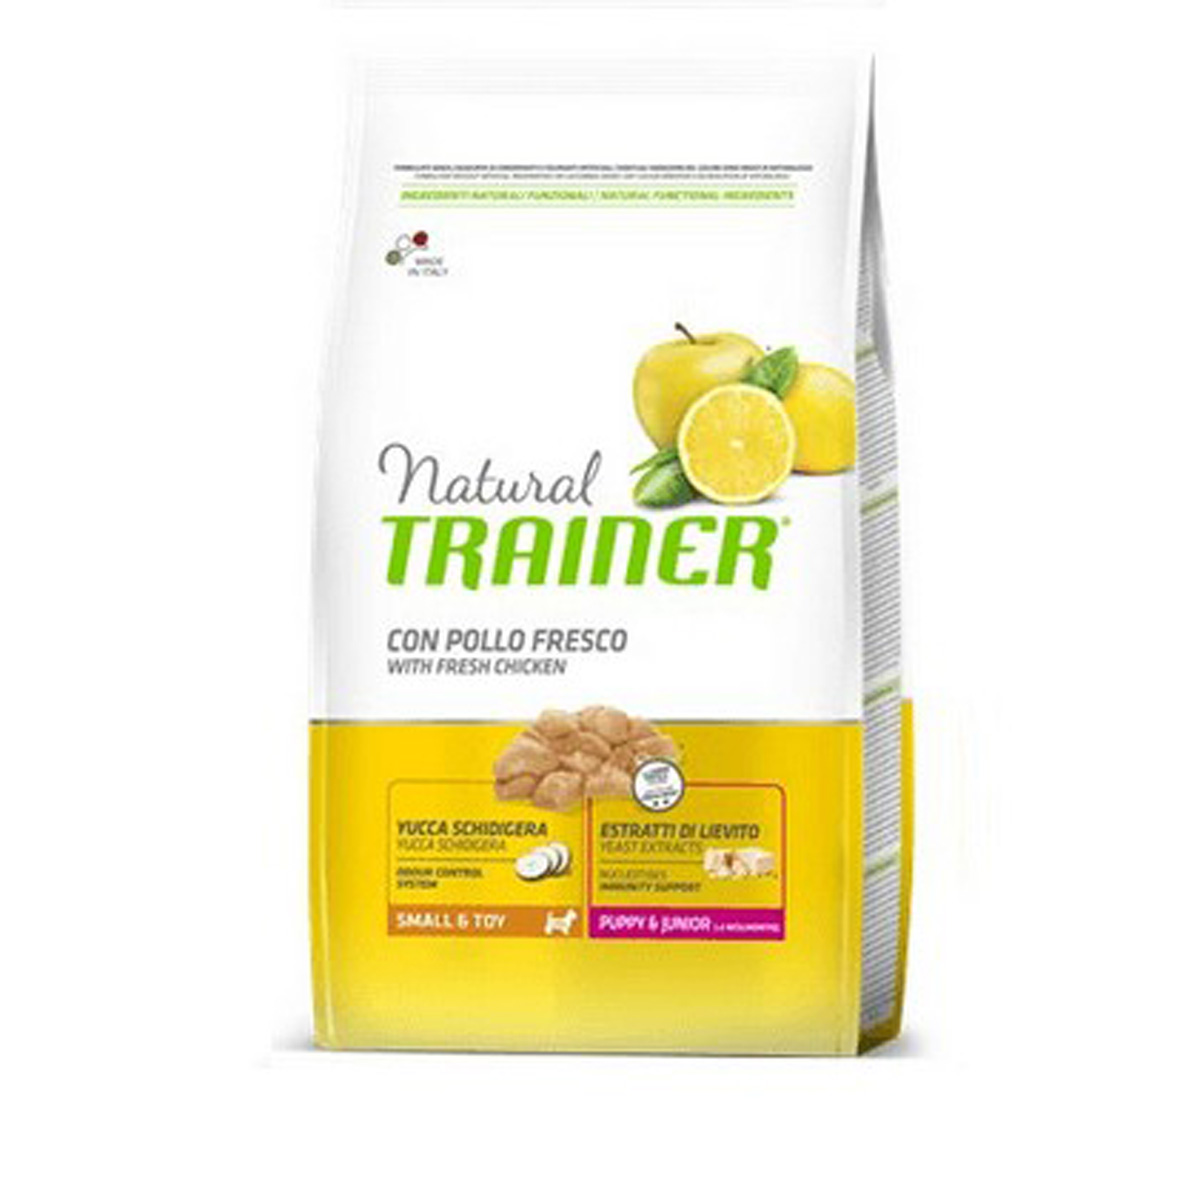 Natural Trainer Dog Small &Toy 2 kg